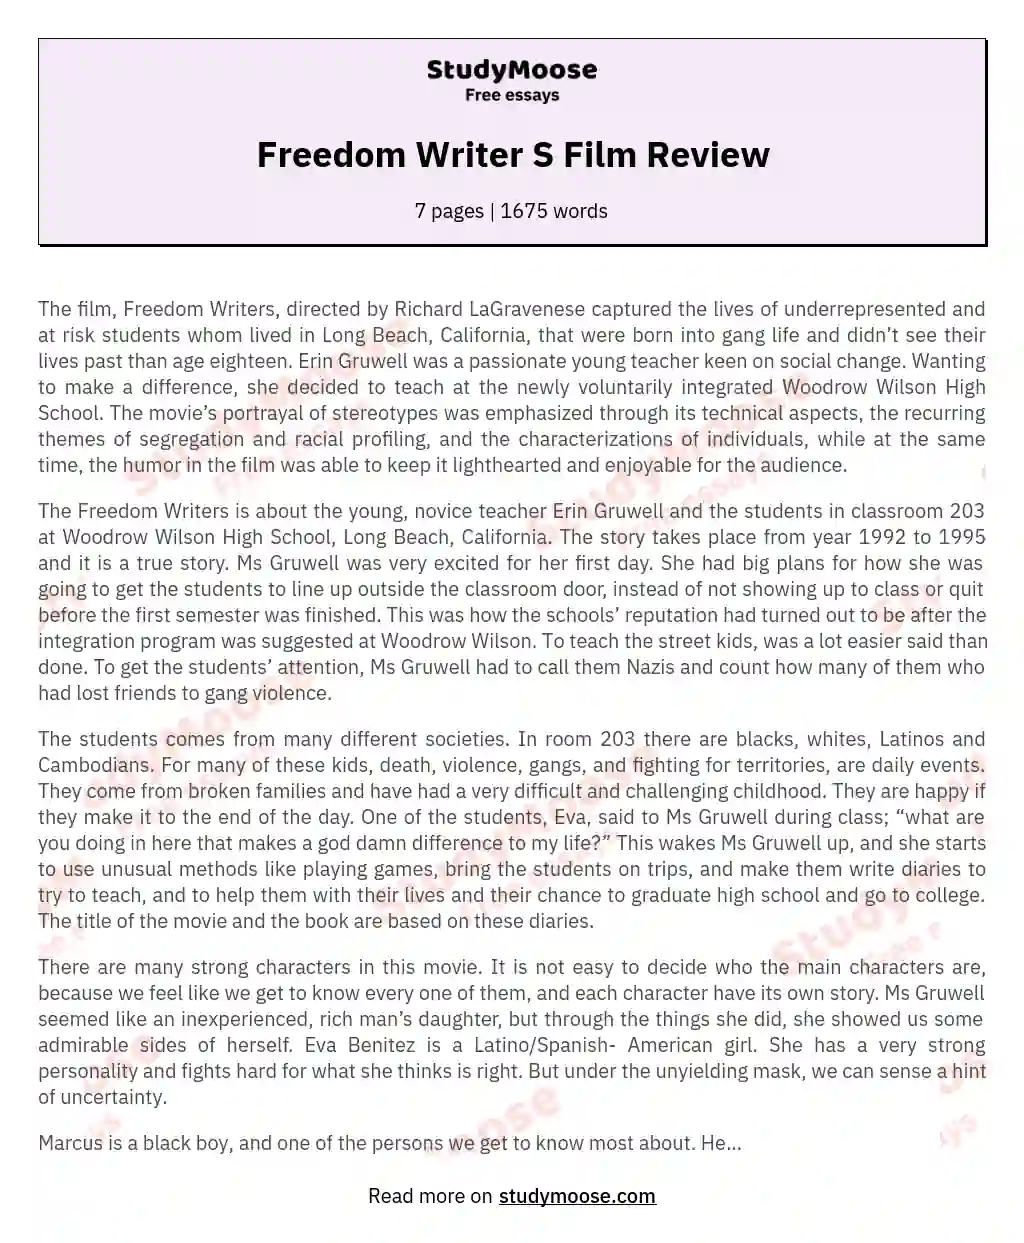 Freedom Writer S Film Review